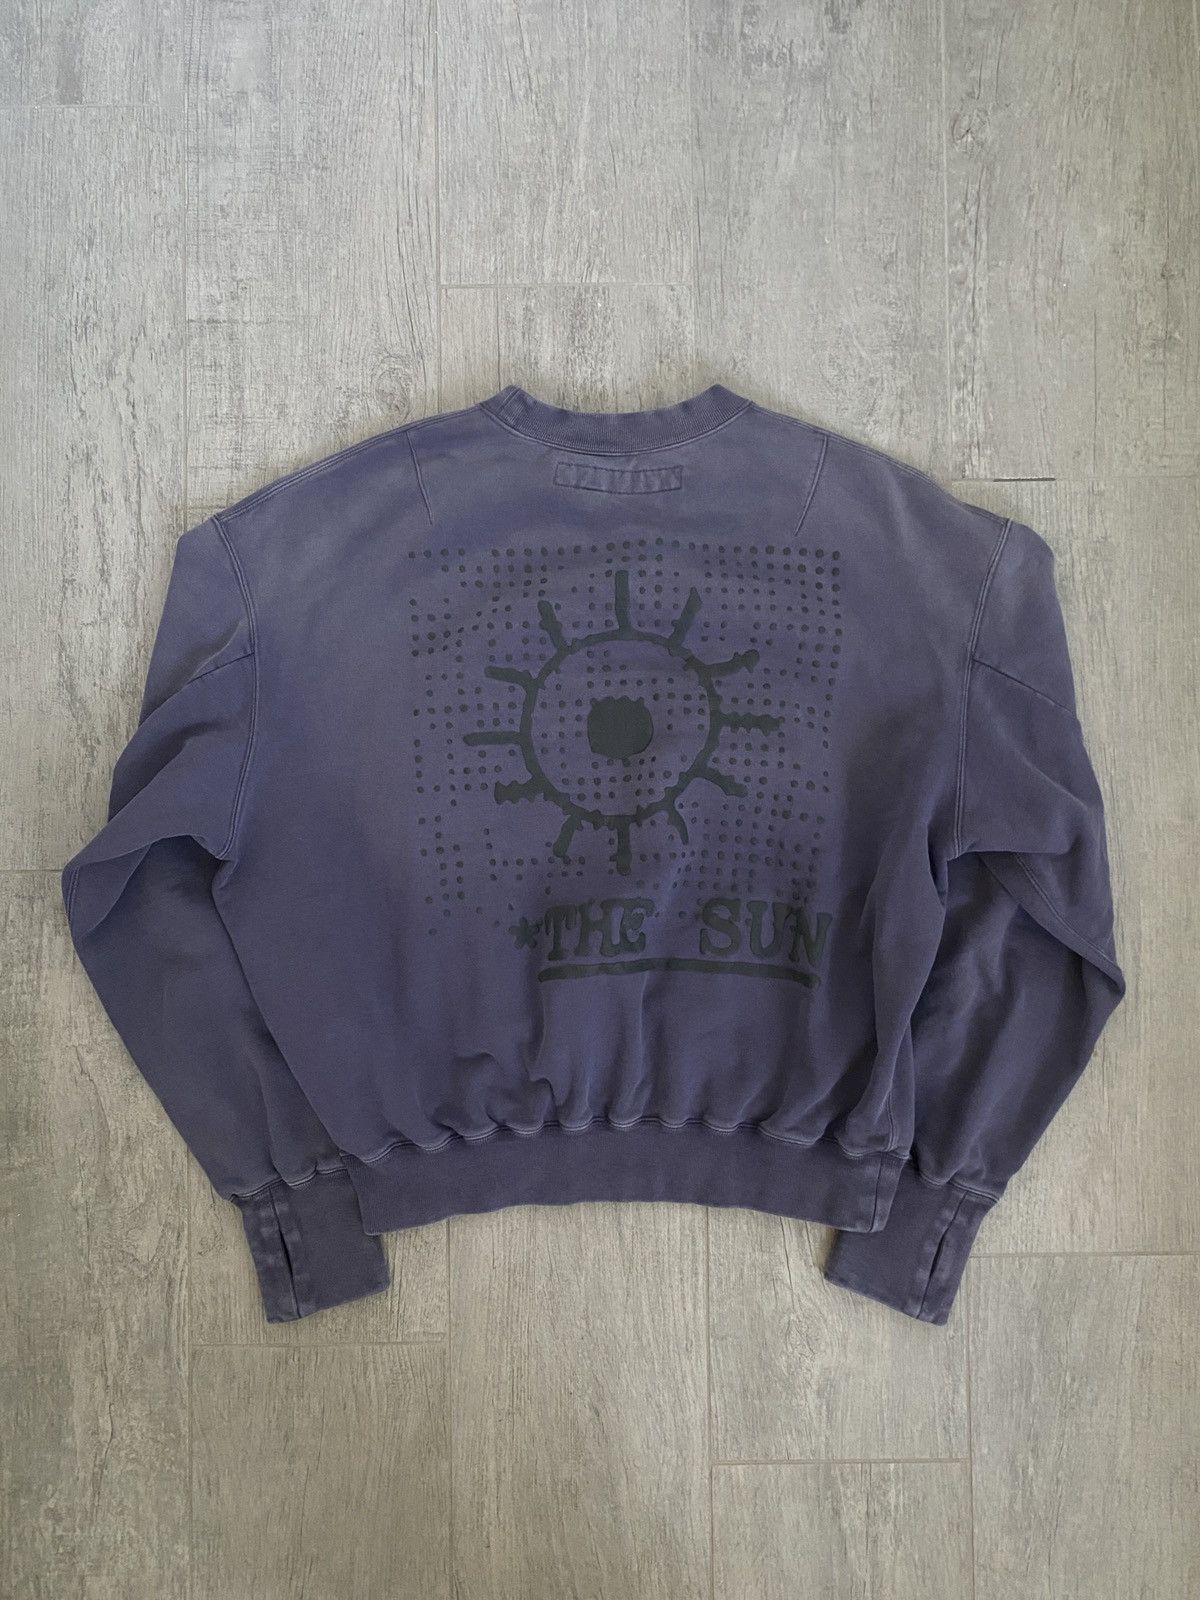 Human Made CPFM x Human Made S3 ー The Moon The Sun Pullover Crewneck |  Grailed